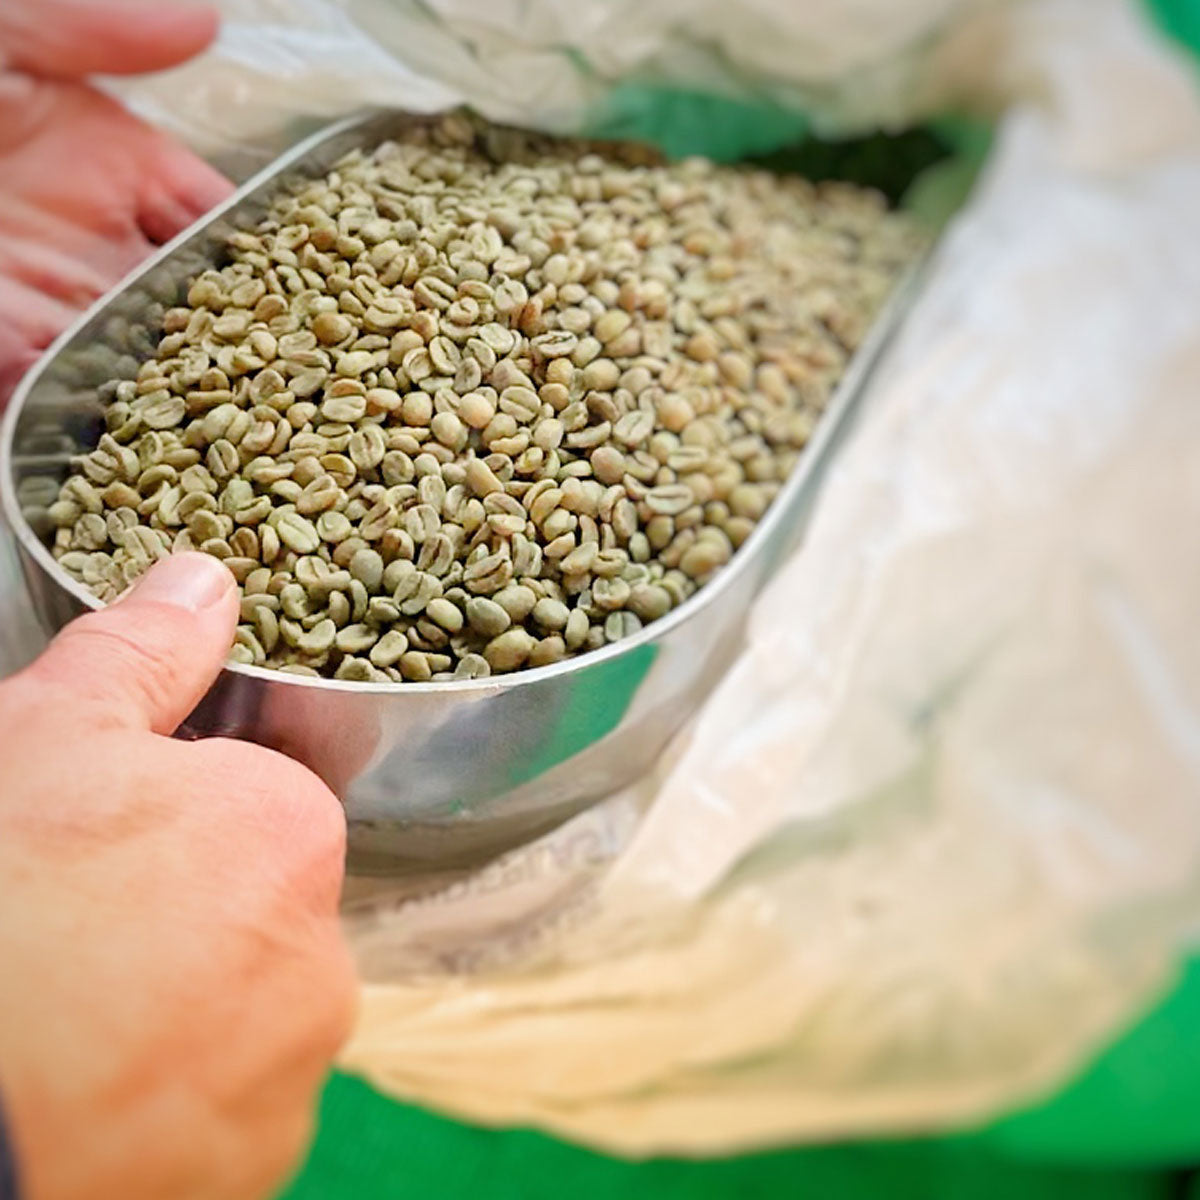 Weighing green coffee beans for roasting